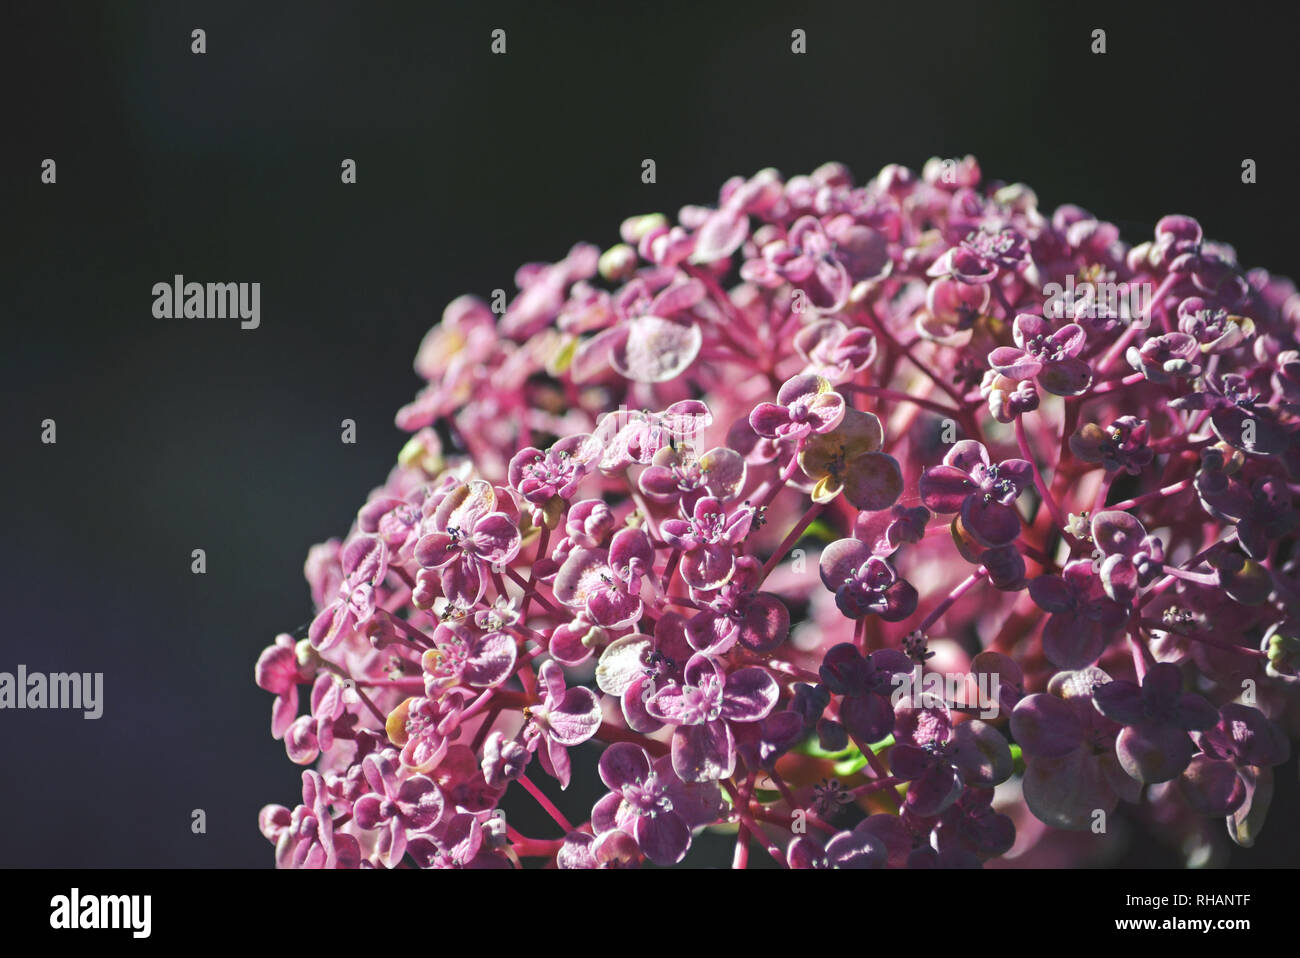 Close up of flowers of a pink and purple Hydrangea umbel Stock Photo